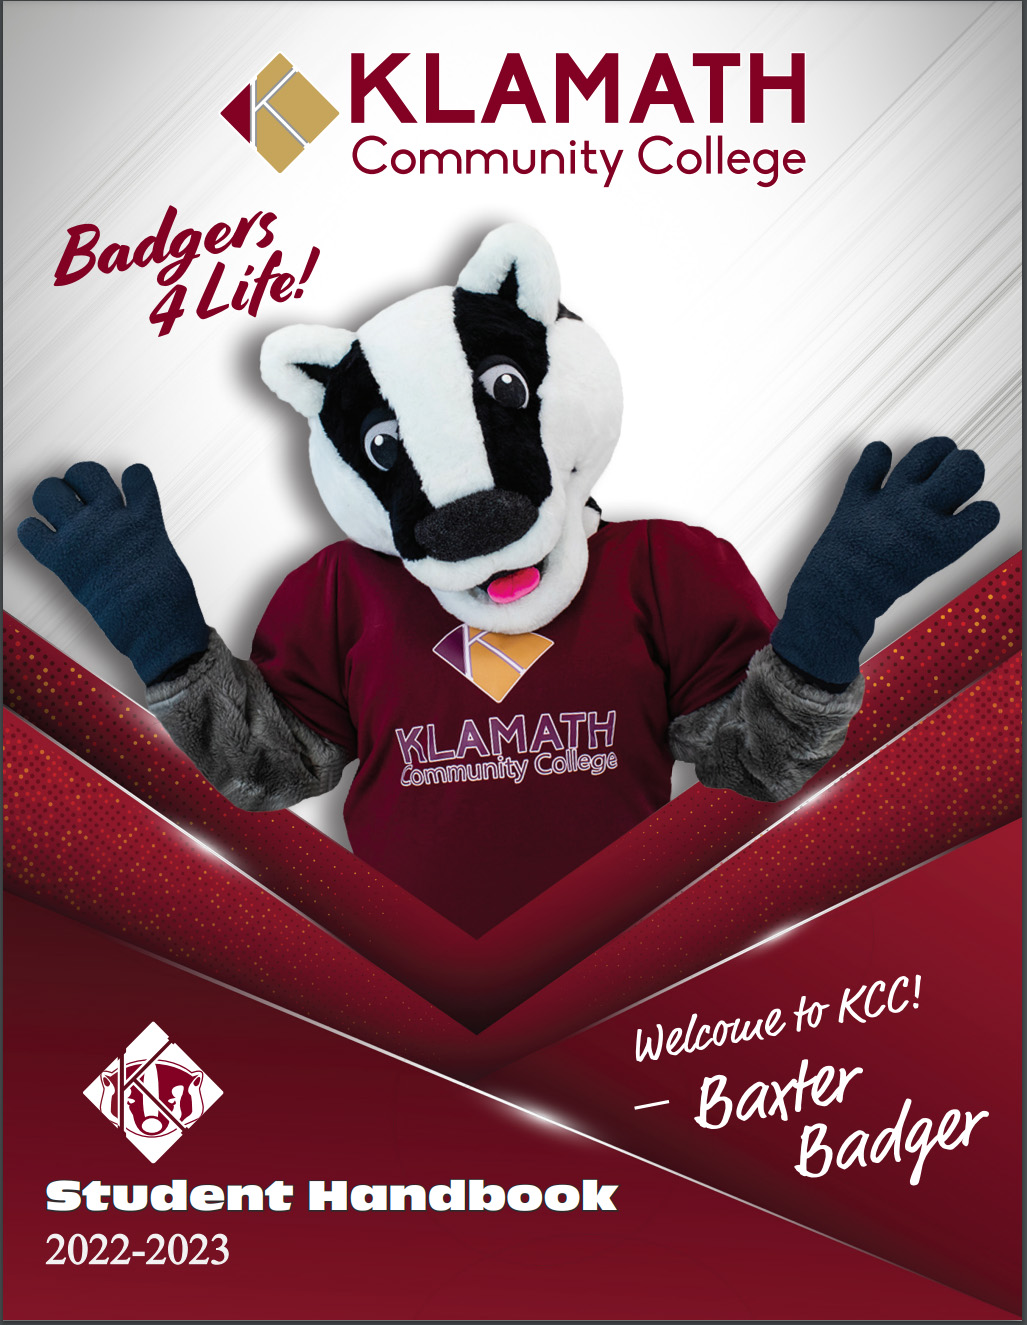 KCC Student Handbook 2022-23 Cover Image with Baxter Badger - Welcome to KCC - Badgers 4 Life!